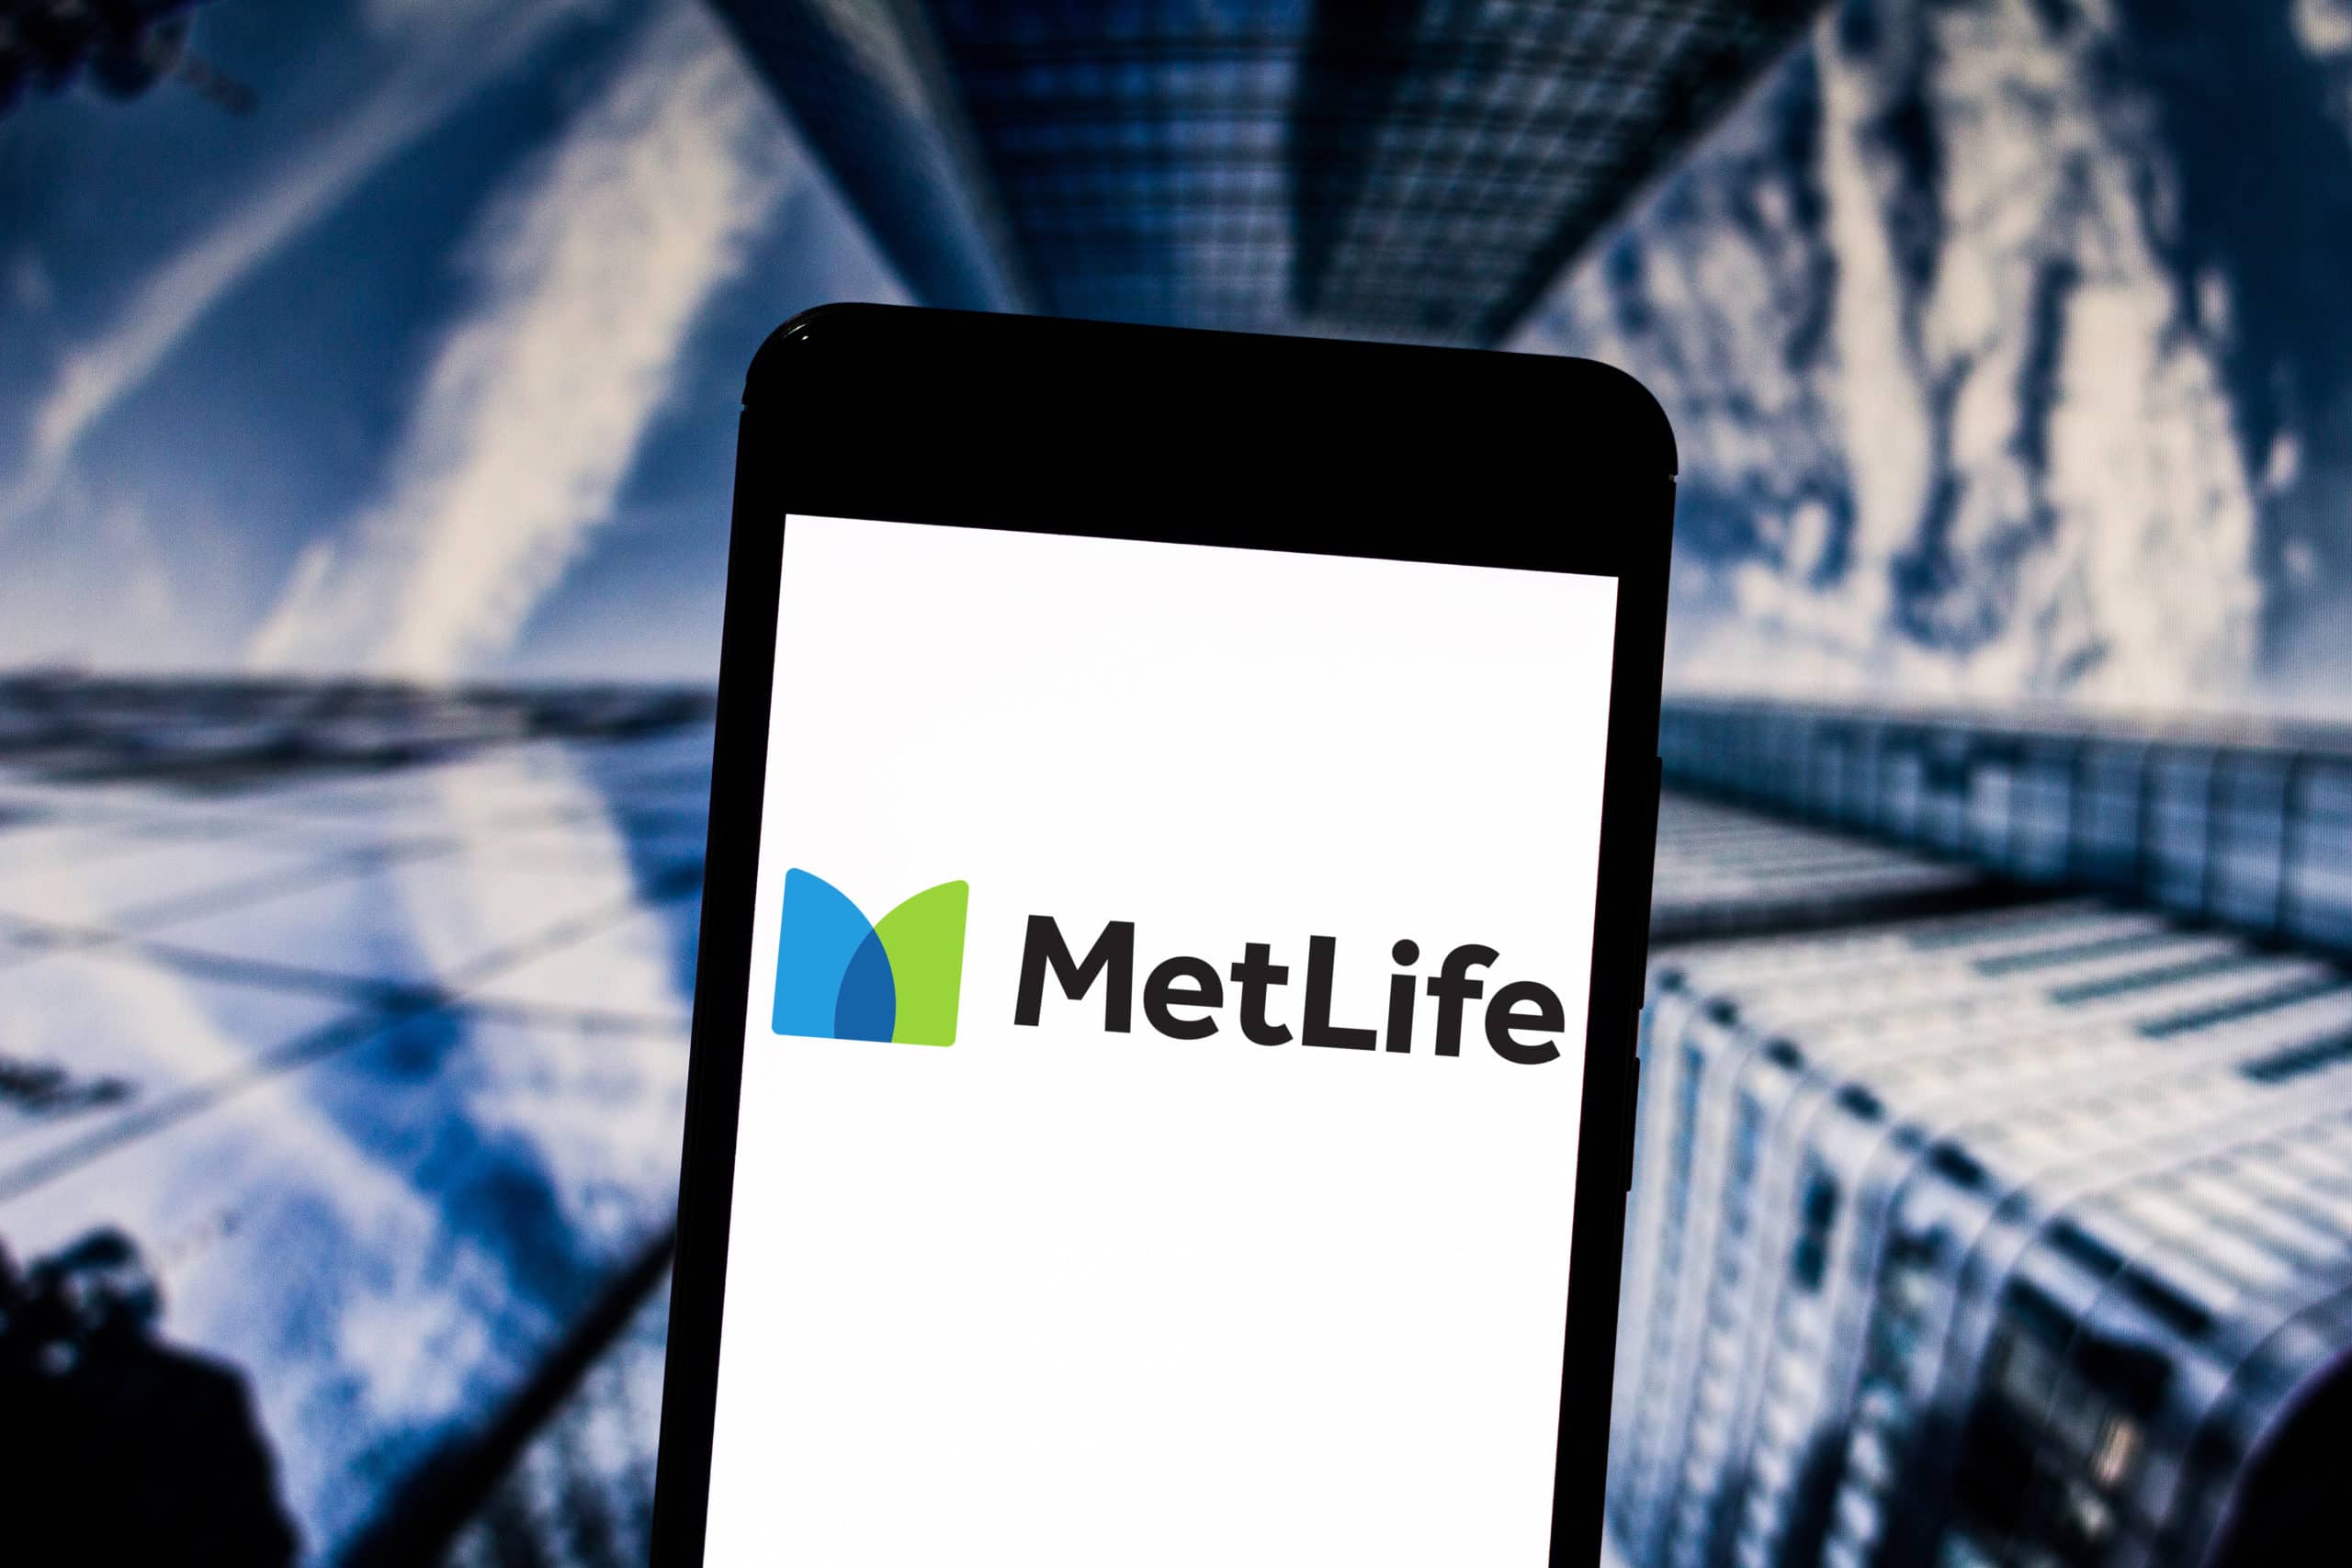 the MetLife logo is displayed on the screen of the mobile device.